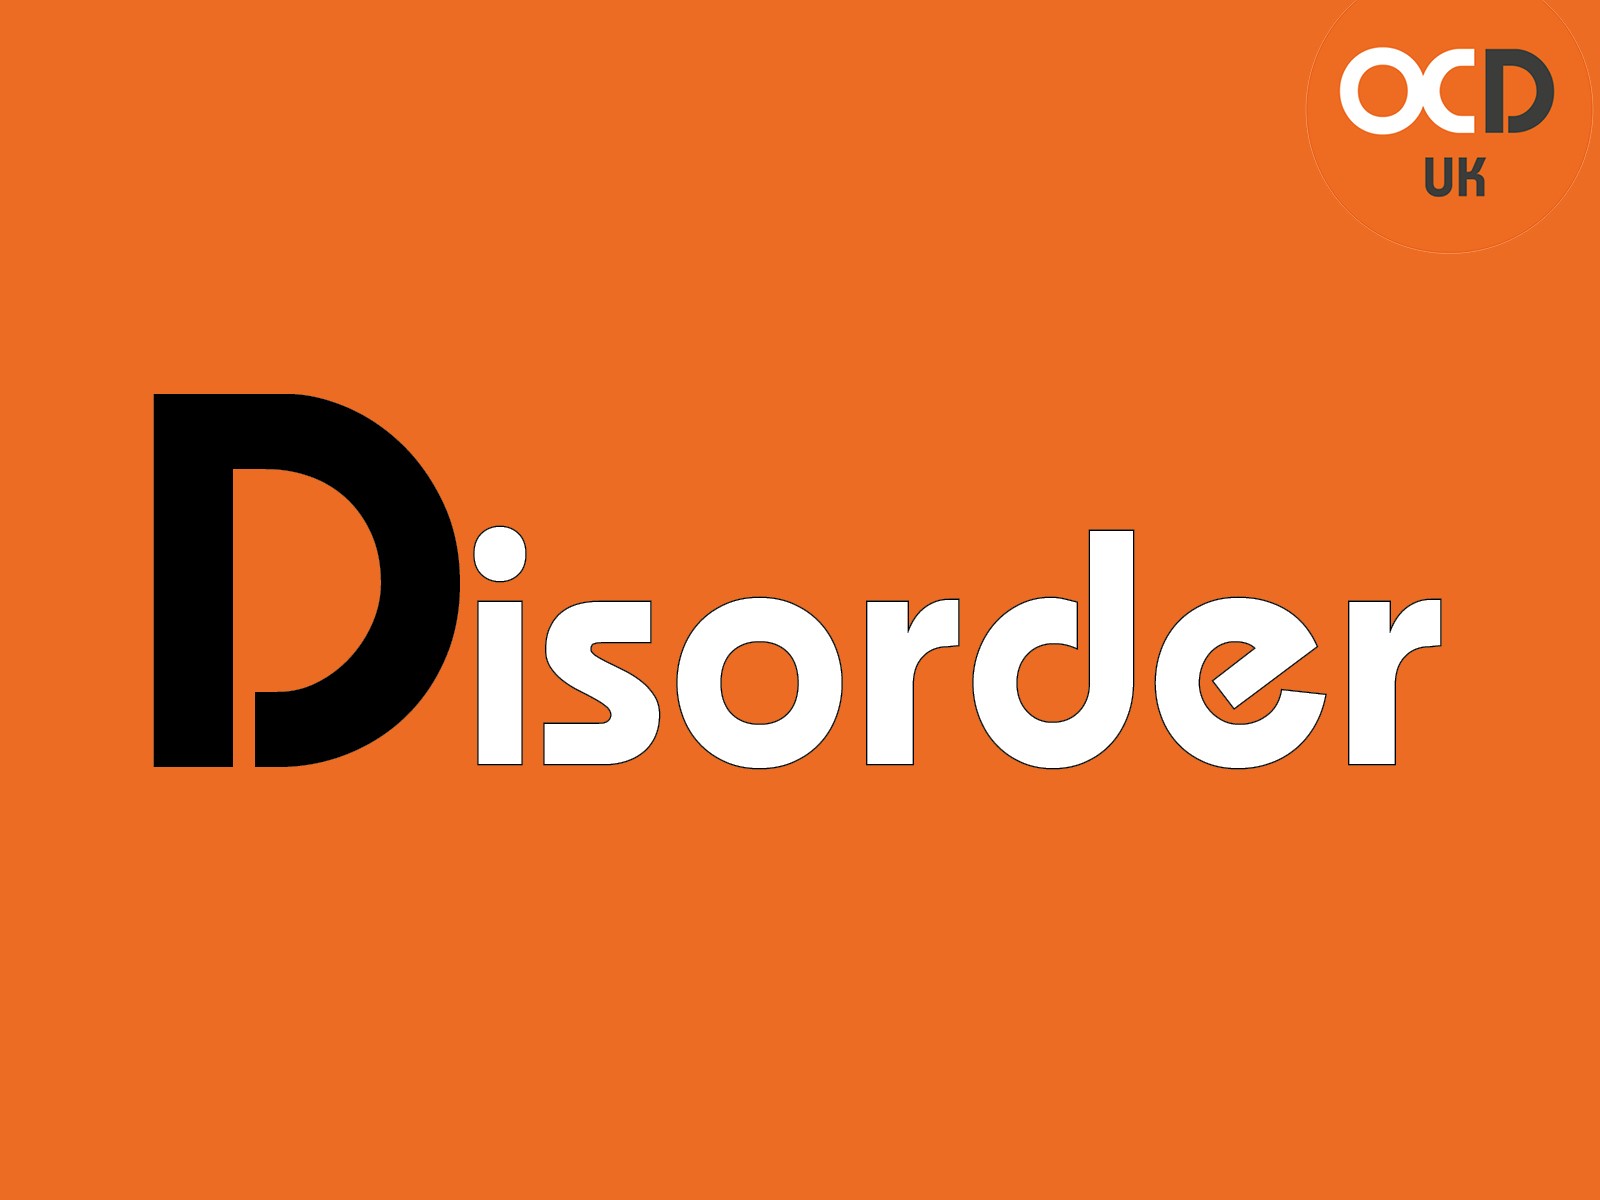 Learn more about Obsessive-Compulsive Disorder.